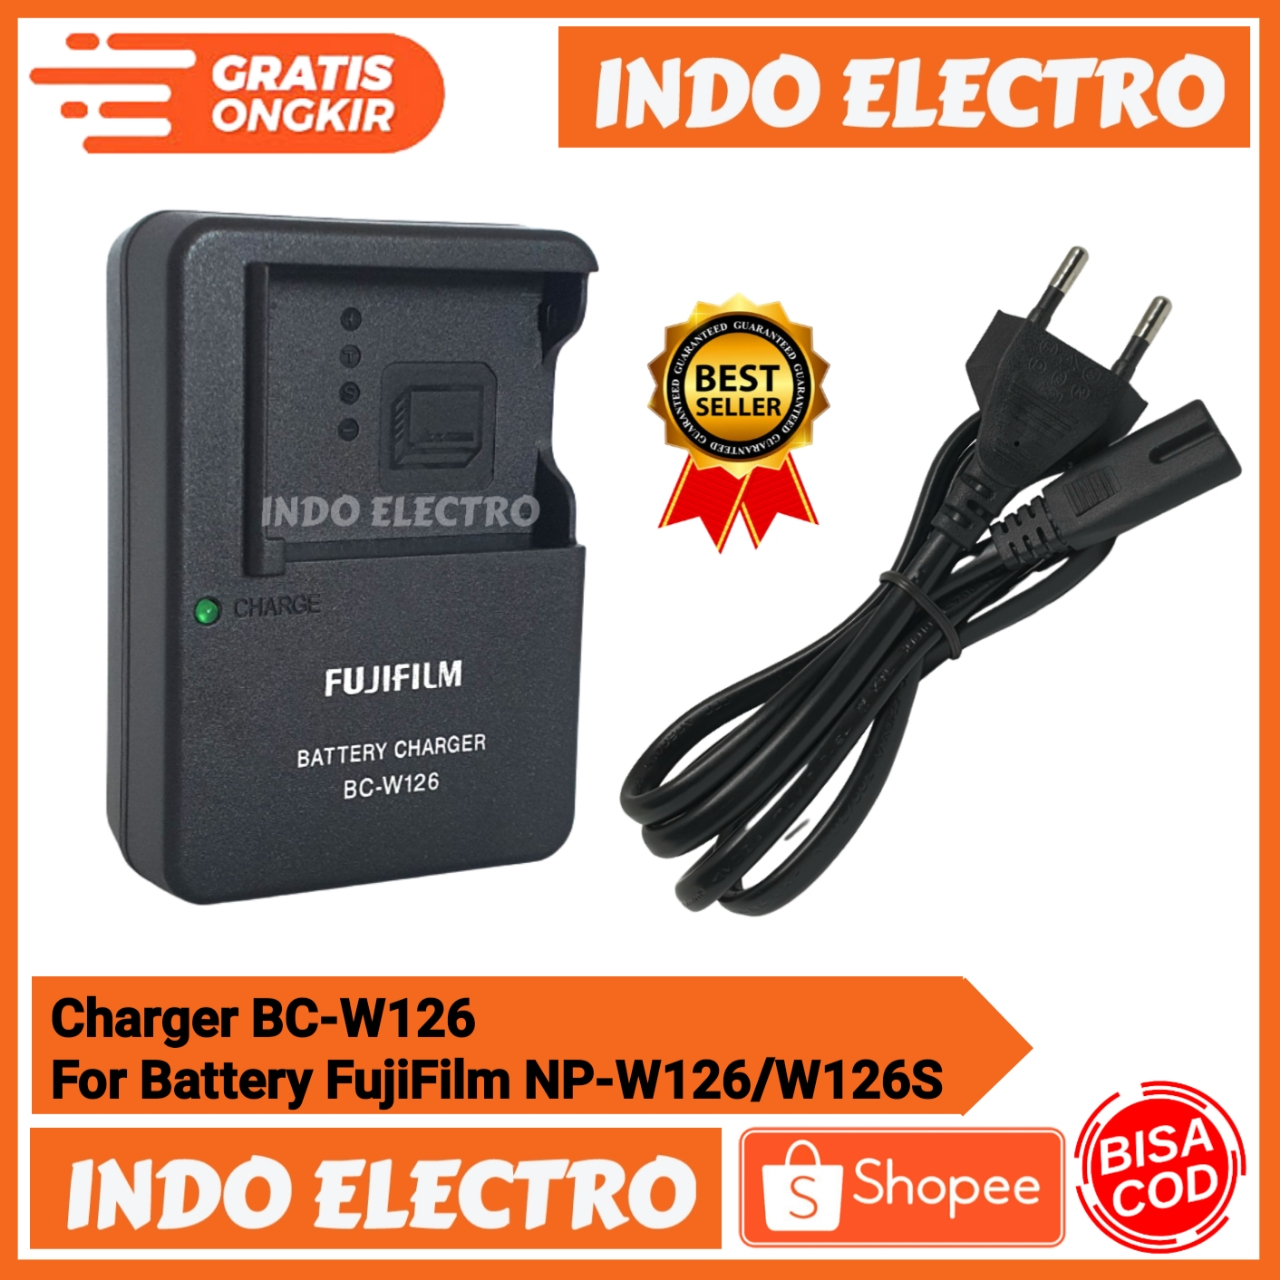 Charger Fujifilm BC-W126 For Battery Fujifilm NP-W126 / NP-W126S